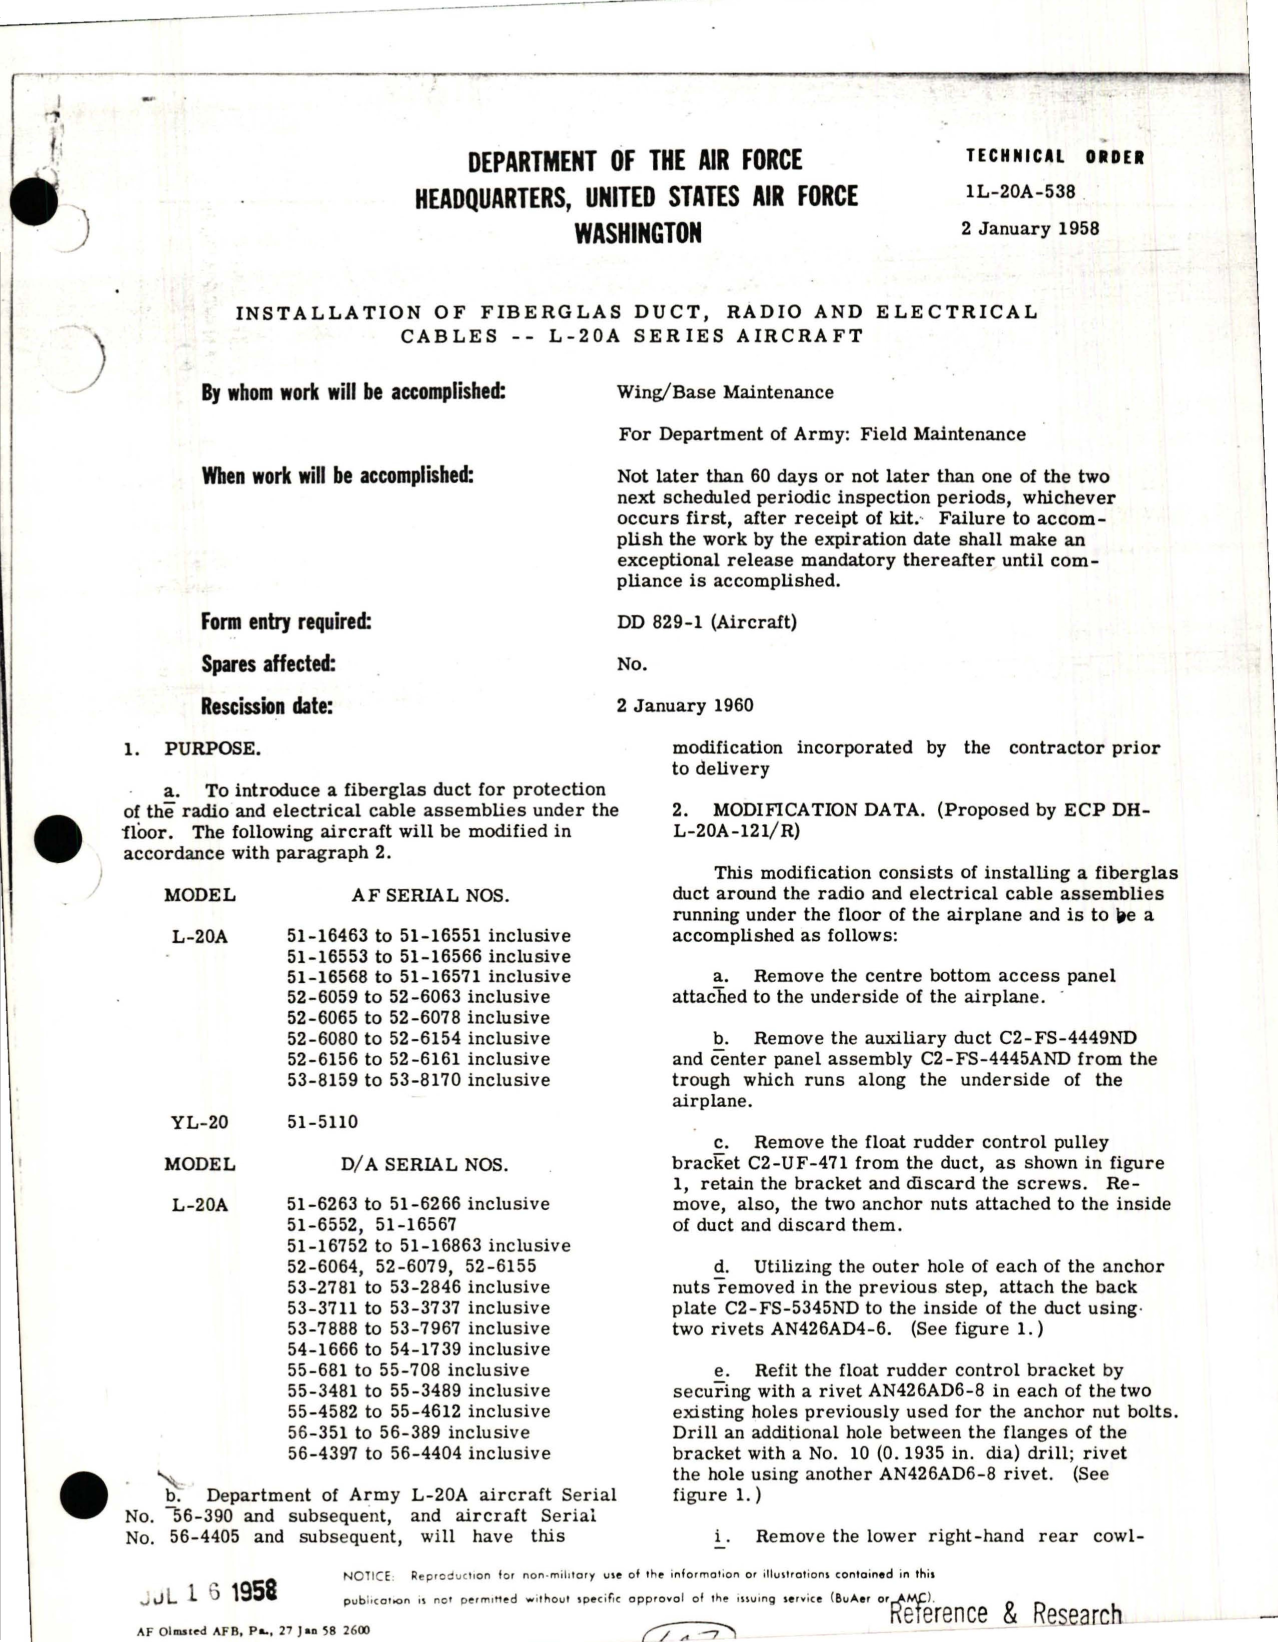 Sample page 1 from AirCorps Library document: Installation of Fiberglas Duct, Radio and & Electrical Cables - L-20A Series